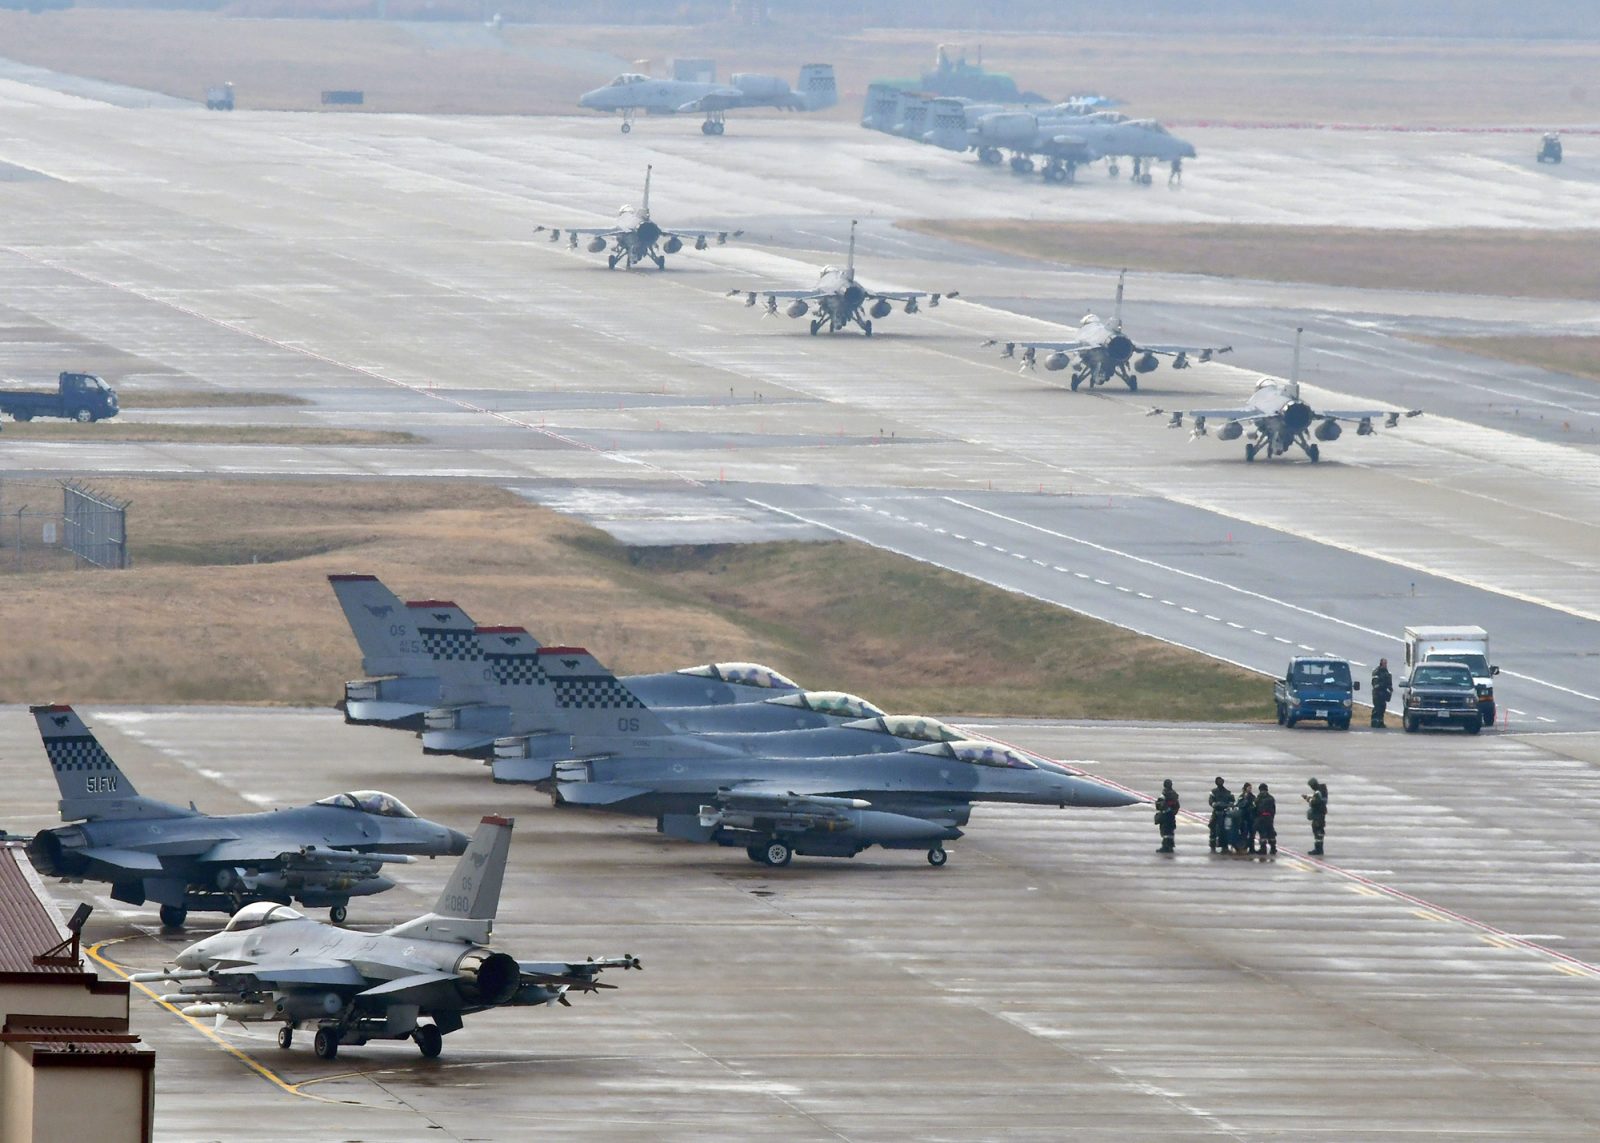 F-35’s First “Elephant Walk” With 35 Lightning II Aircraft at Hill AFB performed by 388th and 419th Fighter Wing